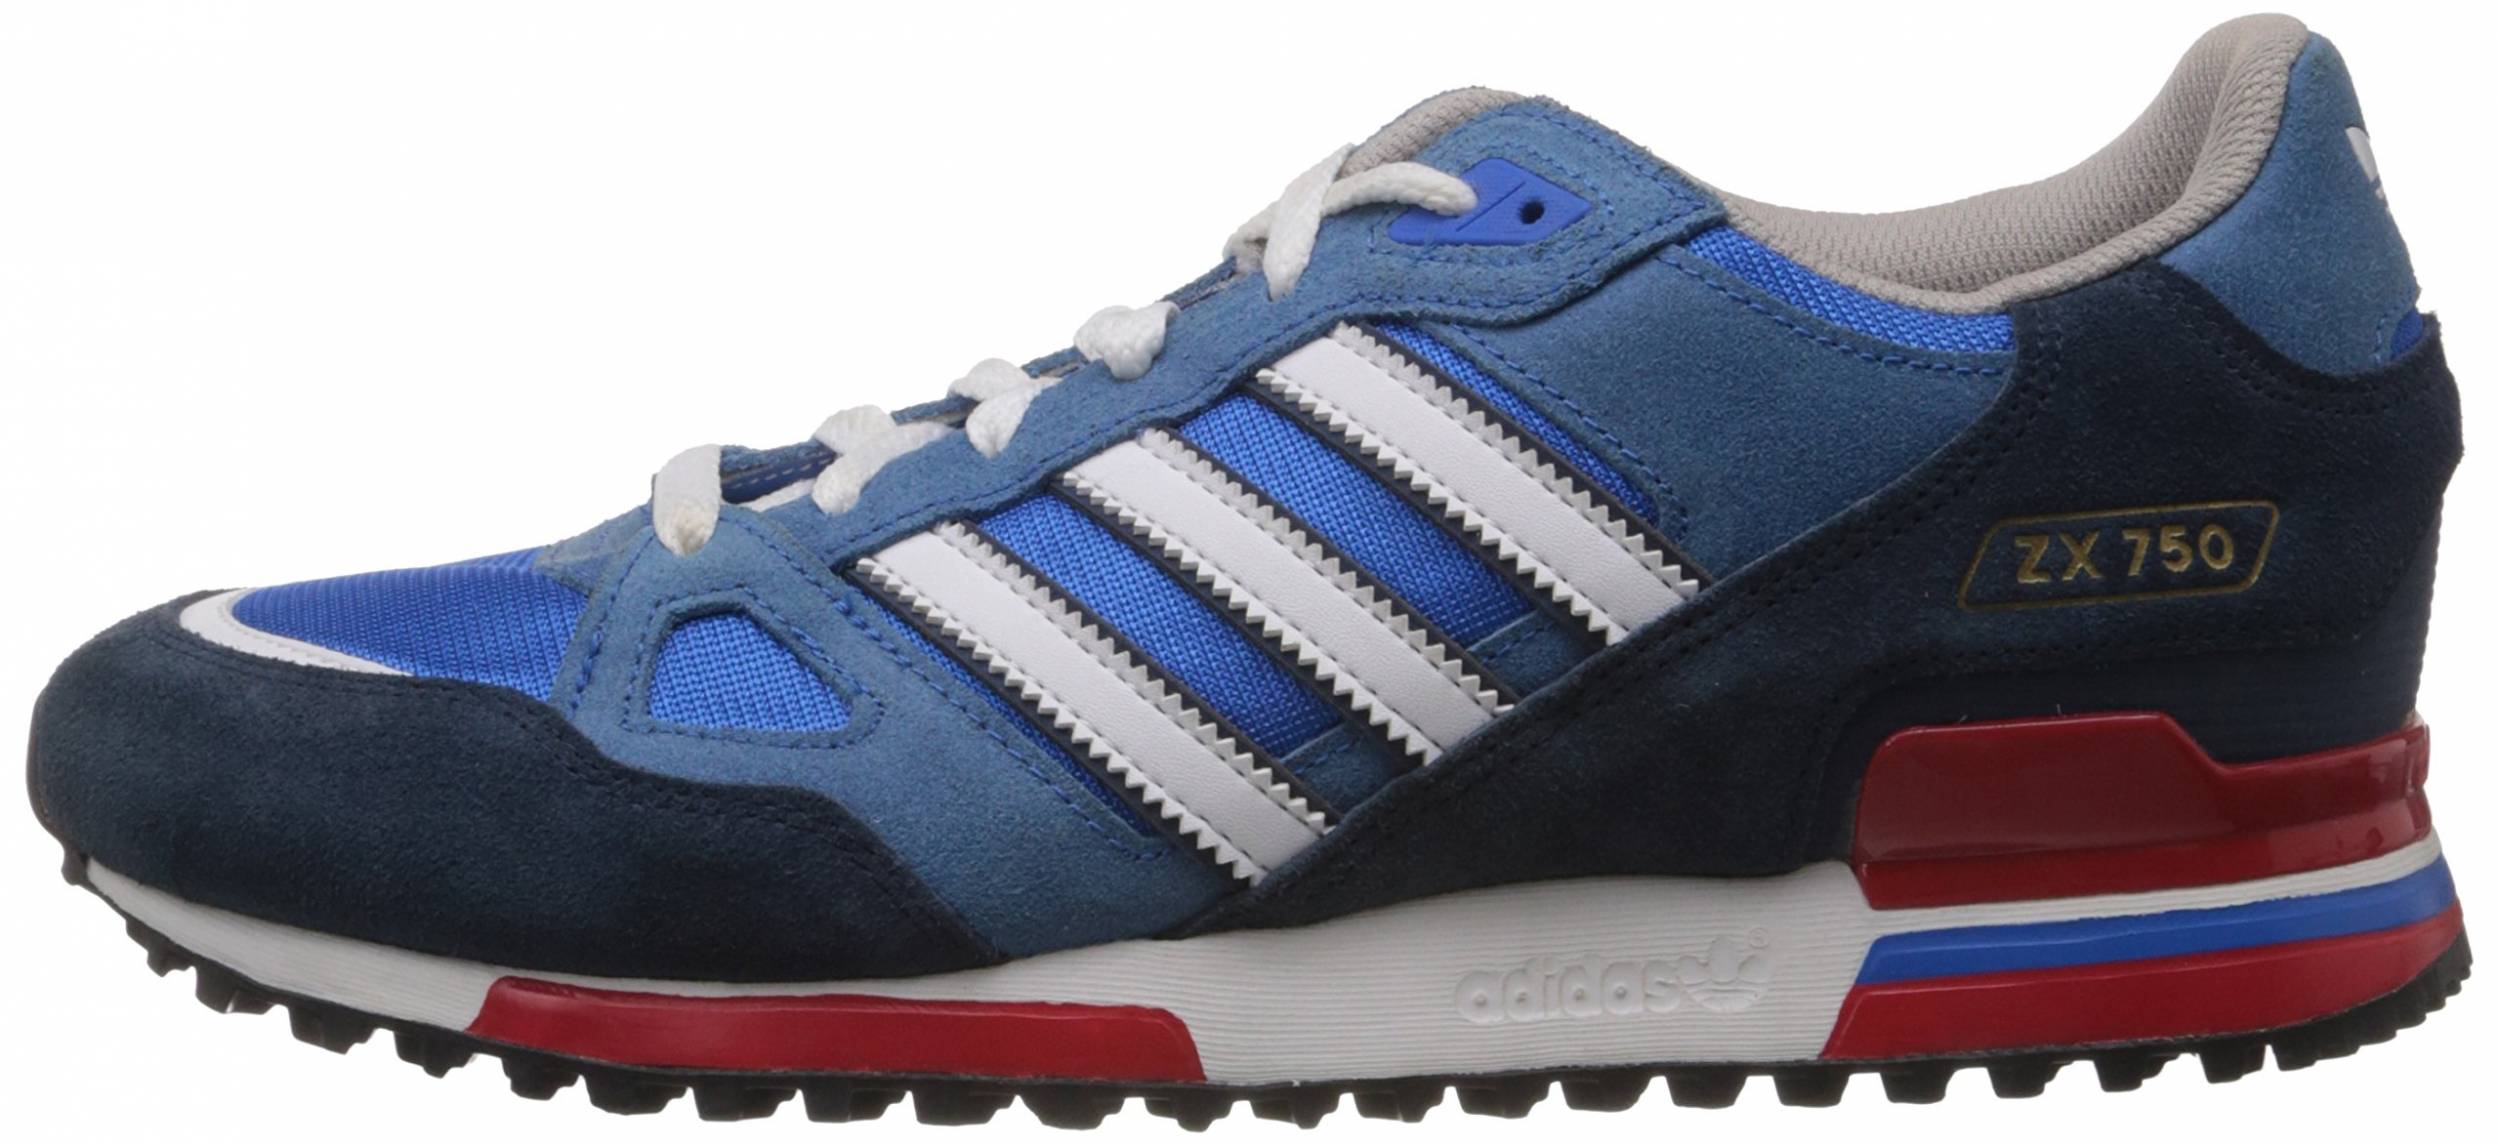 Only £39 + Review of Adidas ZX 750 